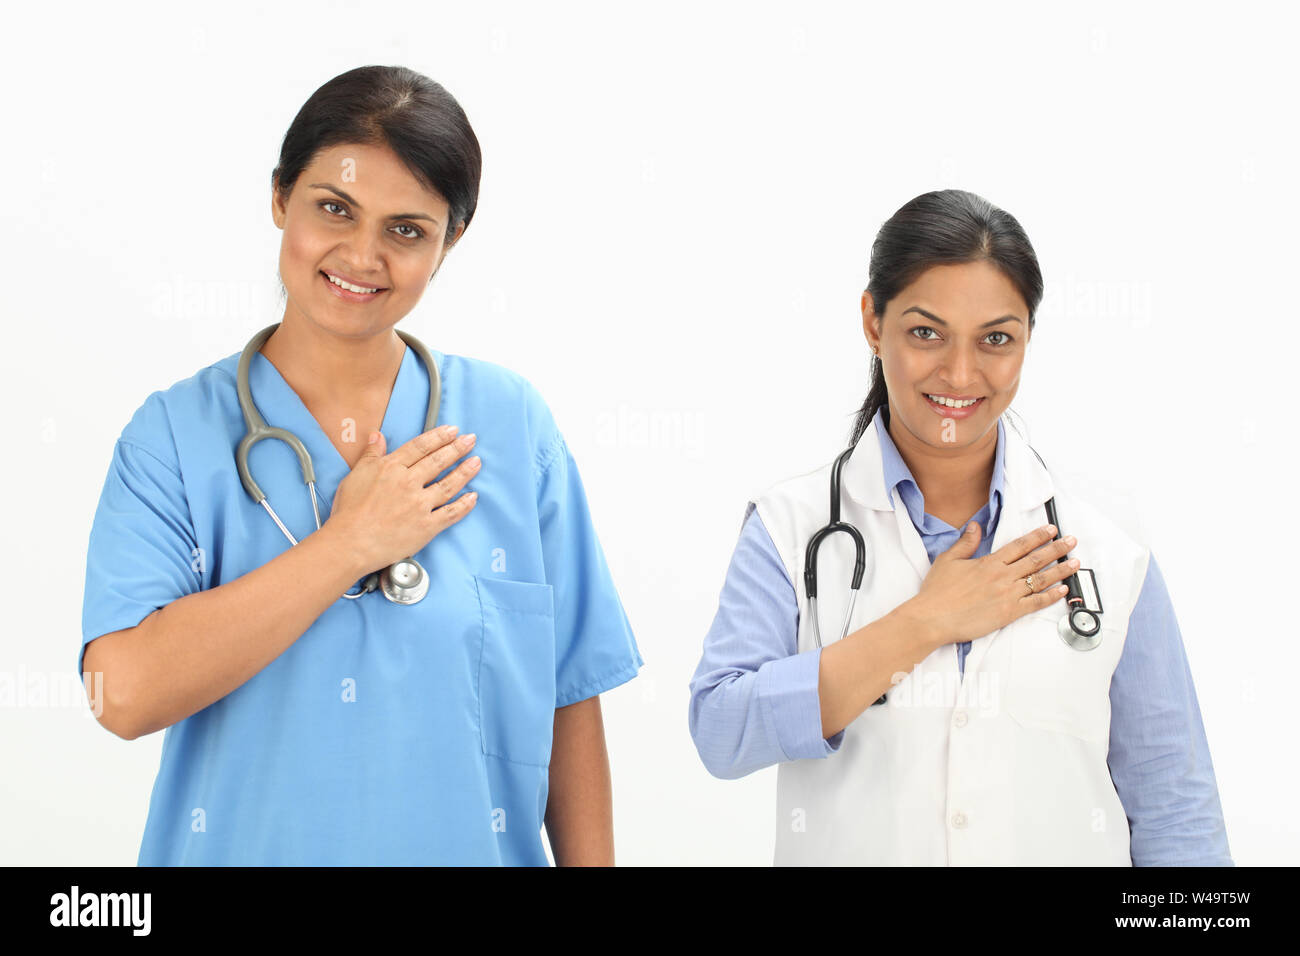 Female doctors smiling with her hand on heart Stock Photo